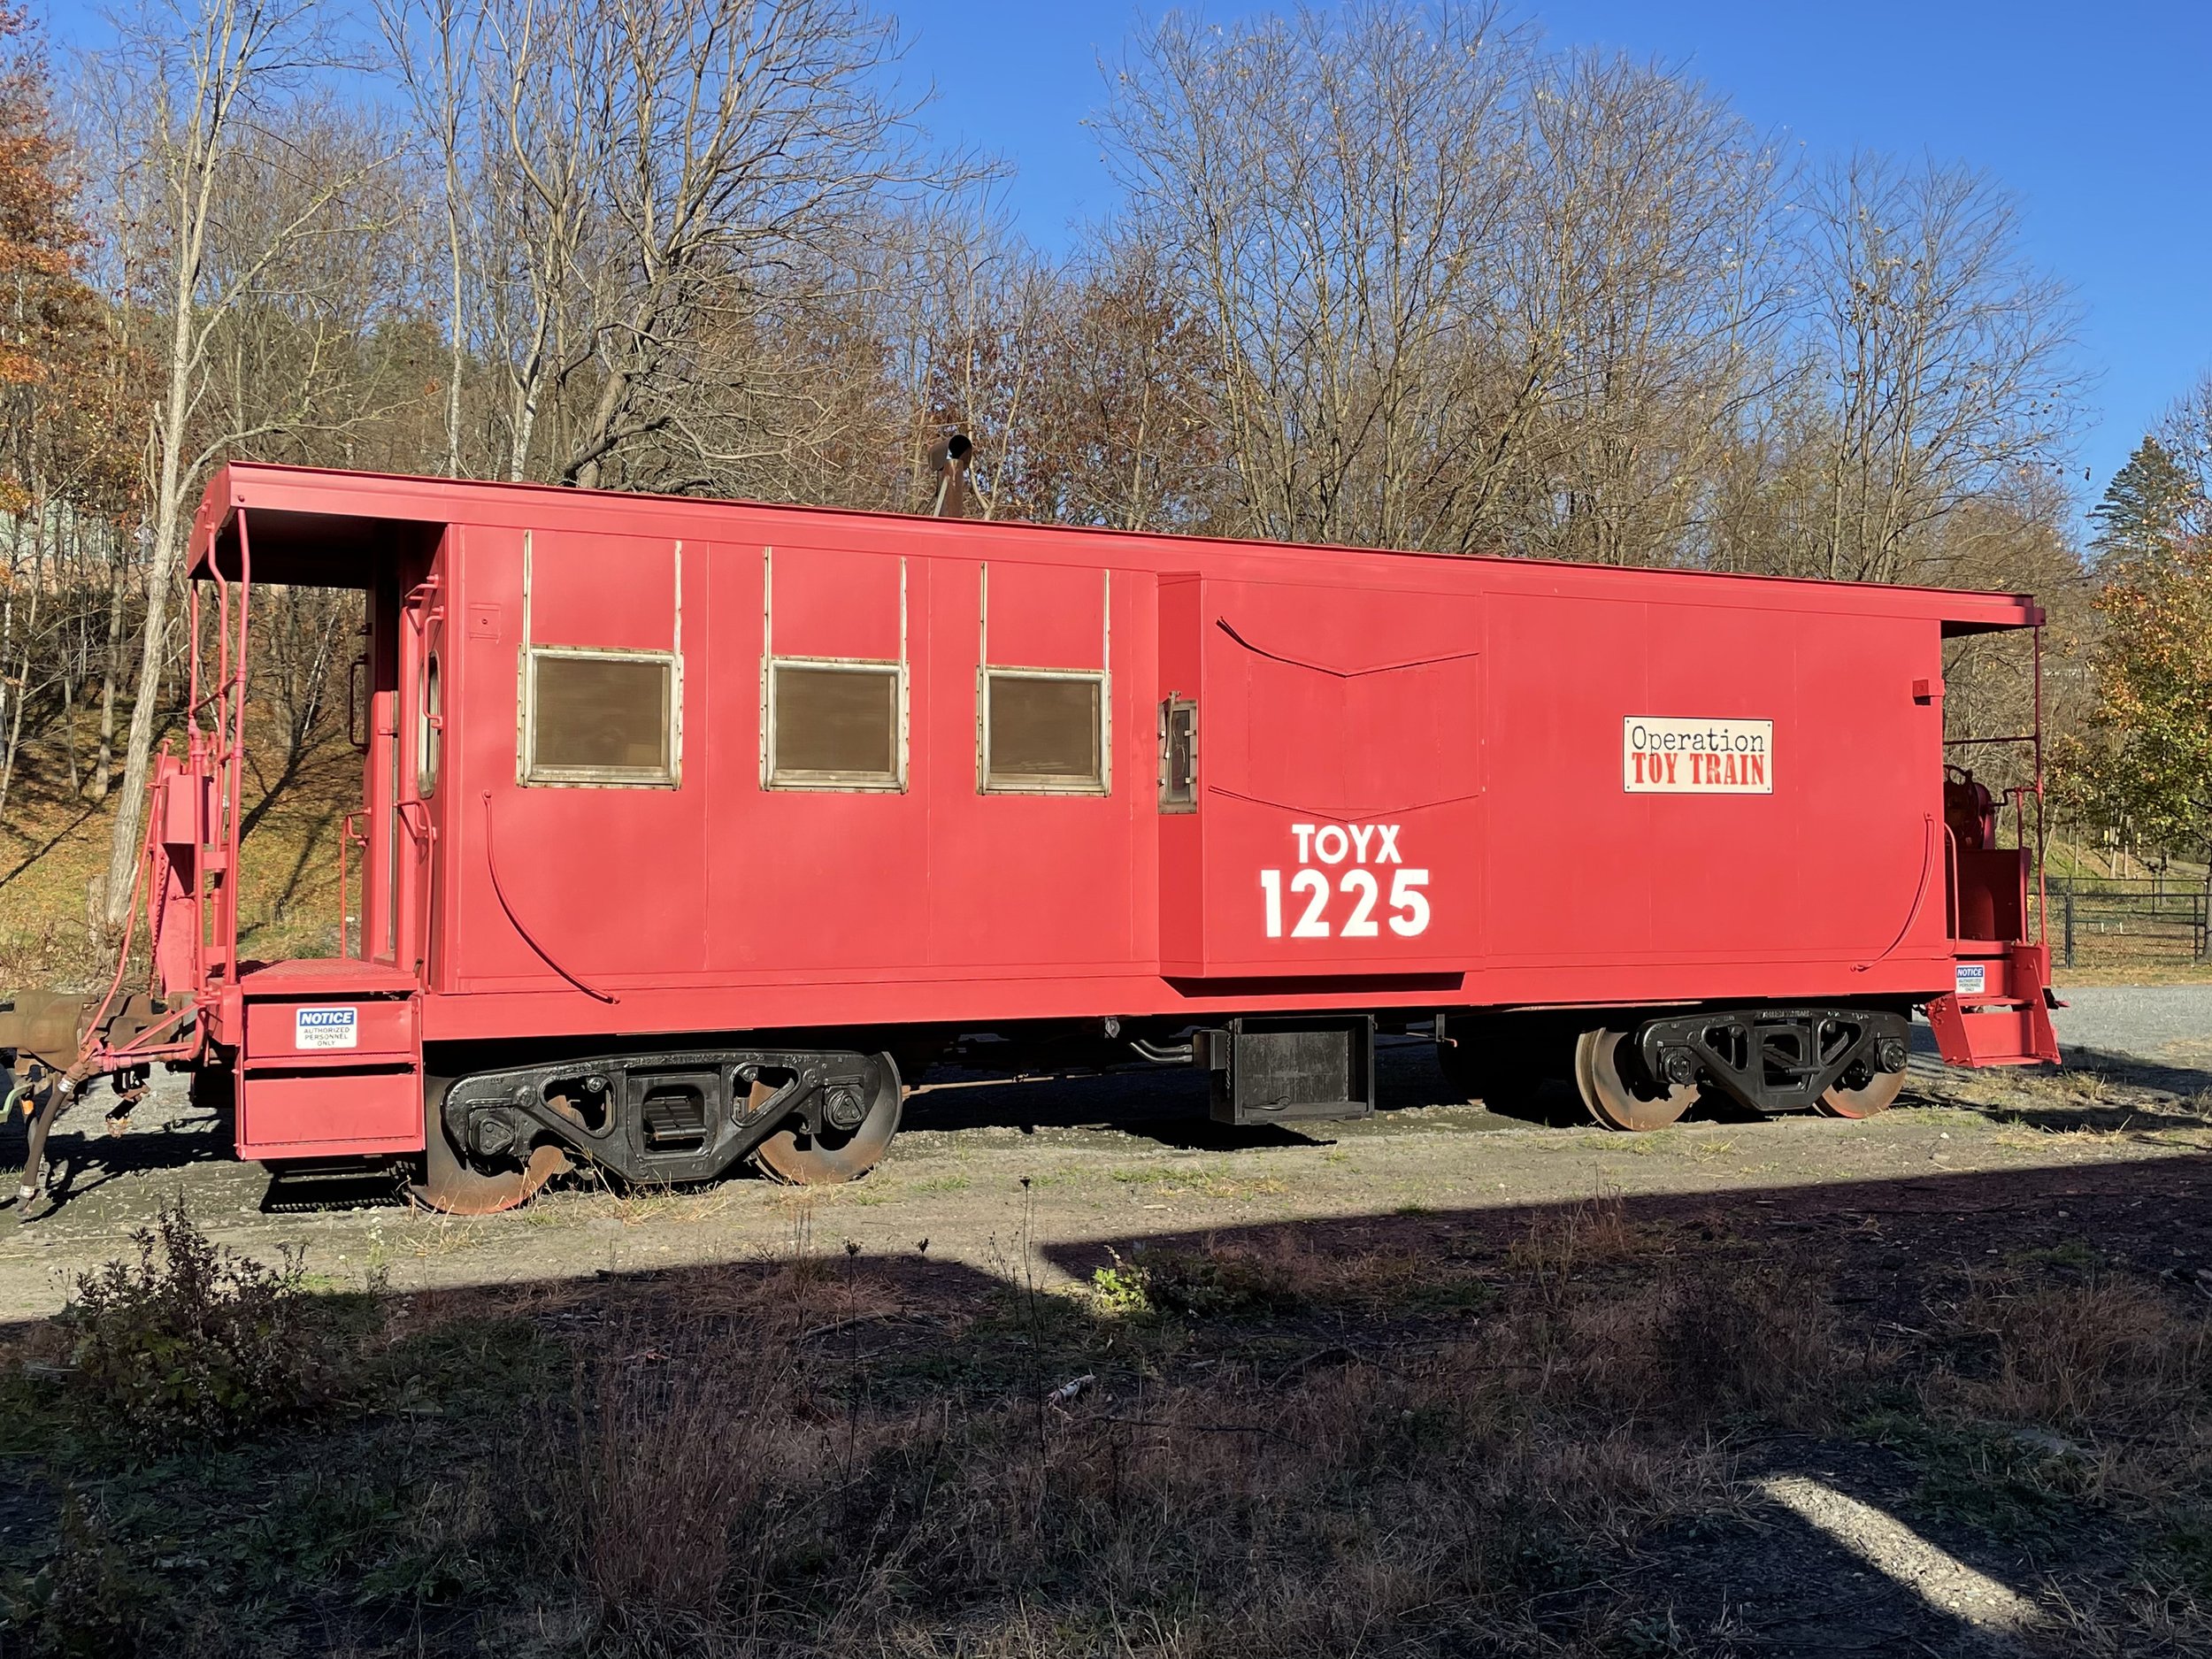 Operation Toy Train caboose 1225